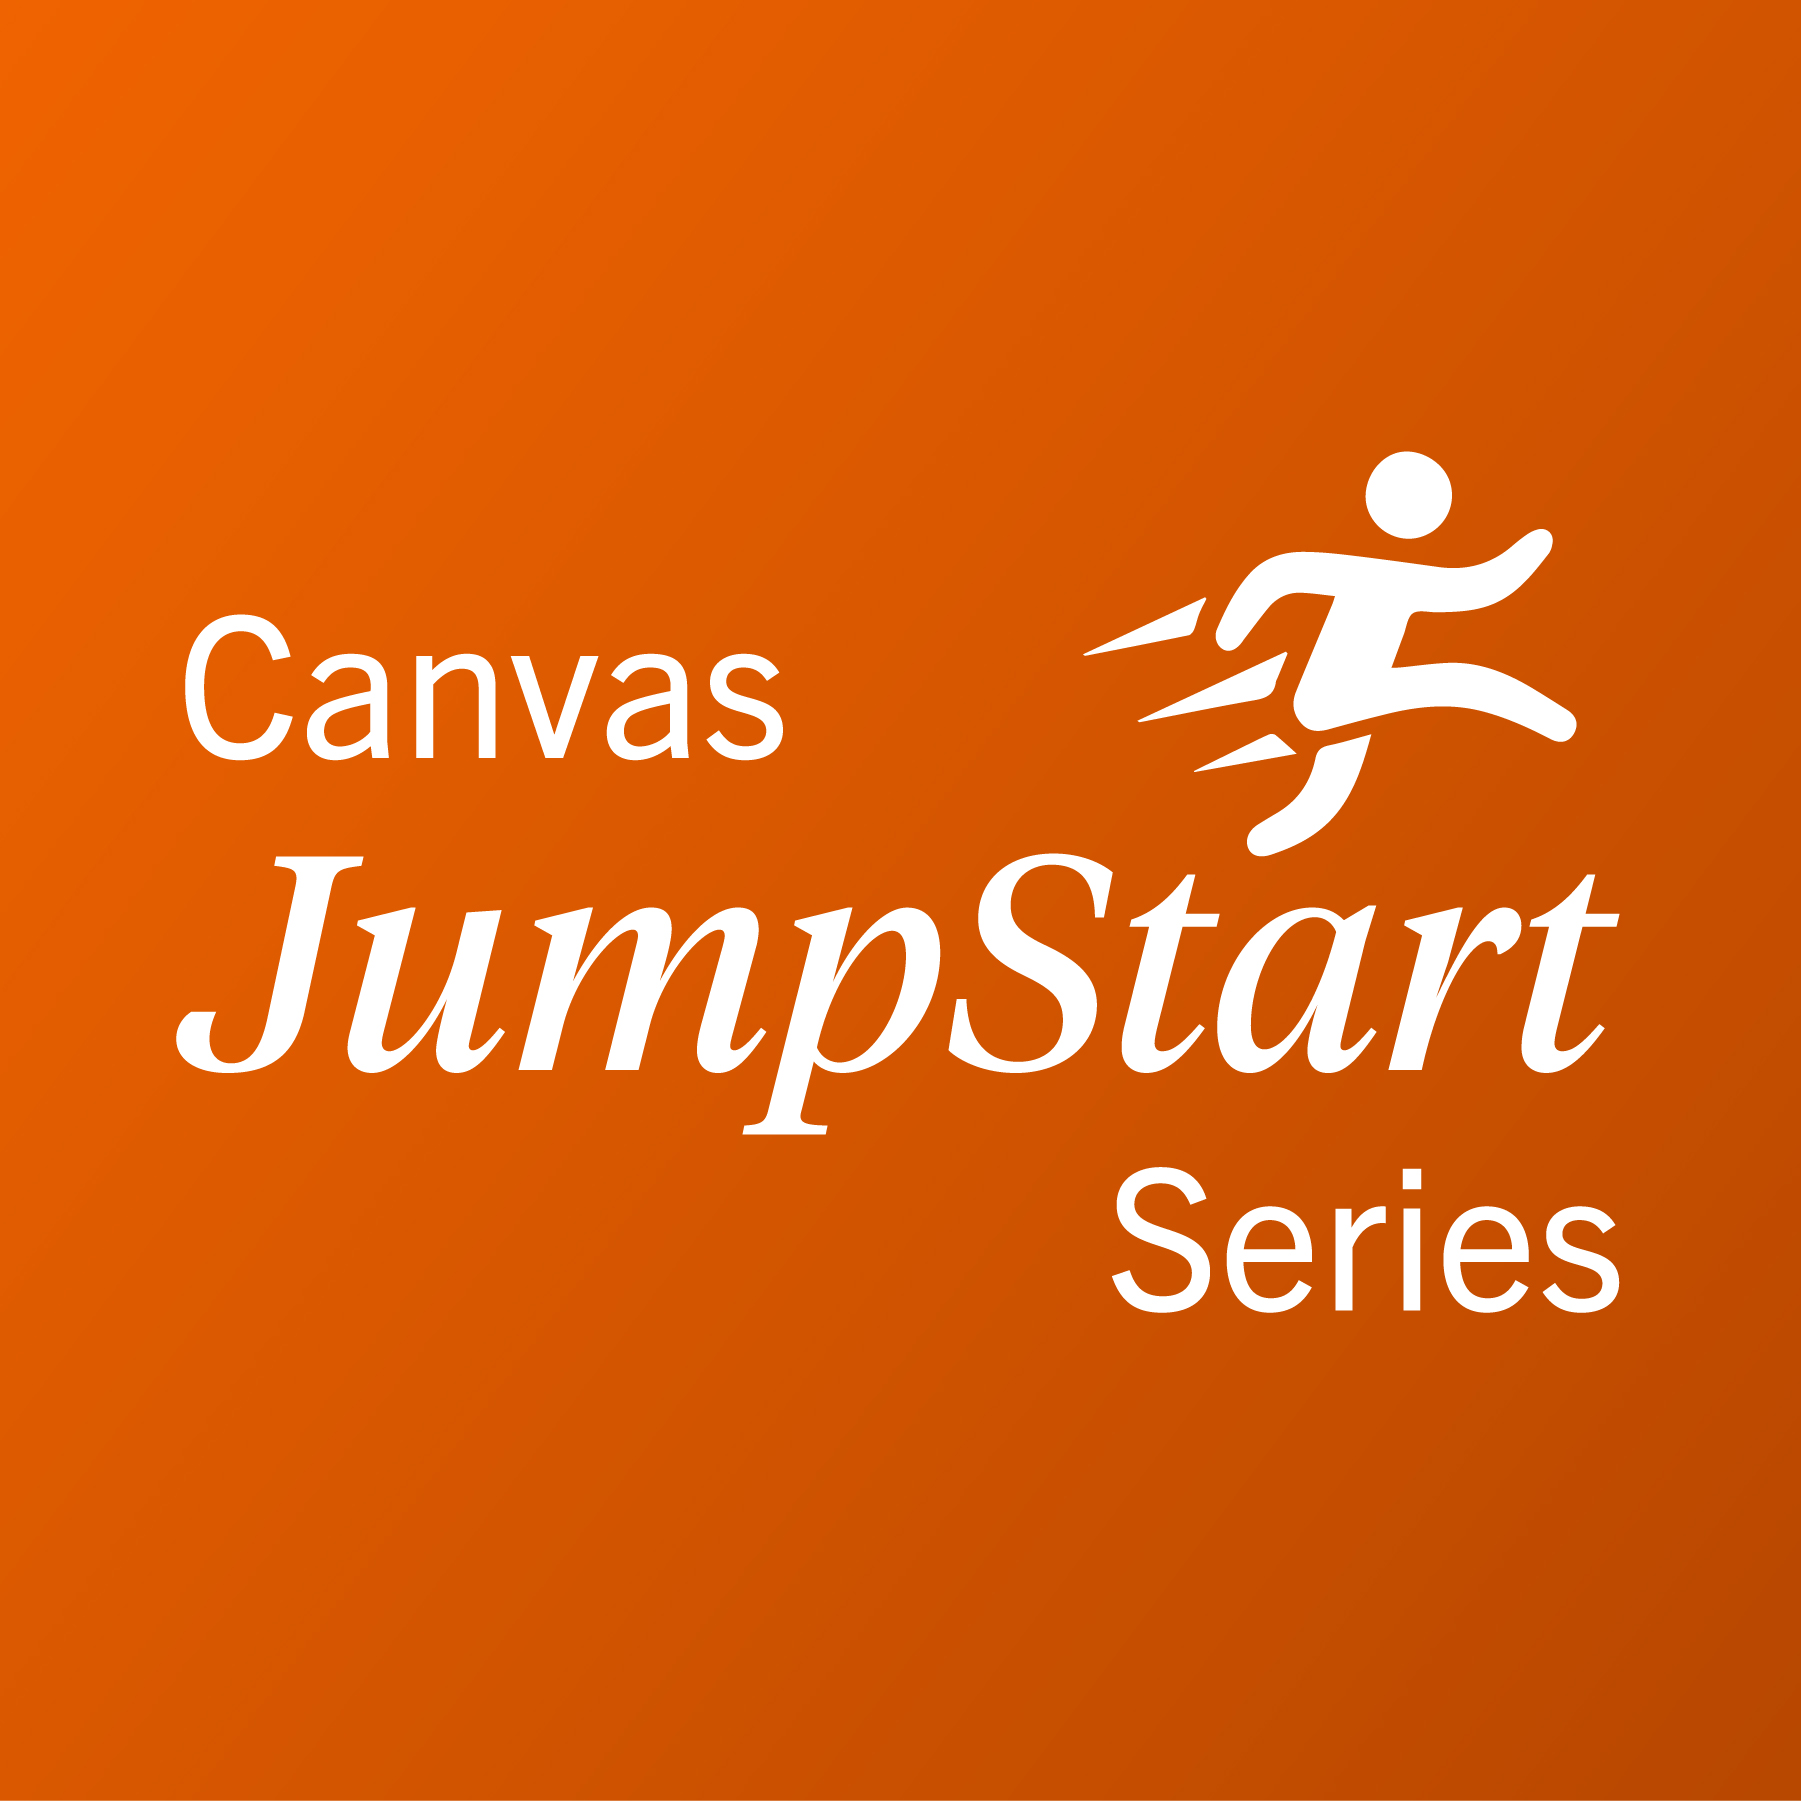 Text that reads: "Canvas Jumpstart Series" with Icon of a stick figure jumping